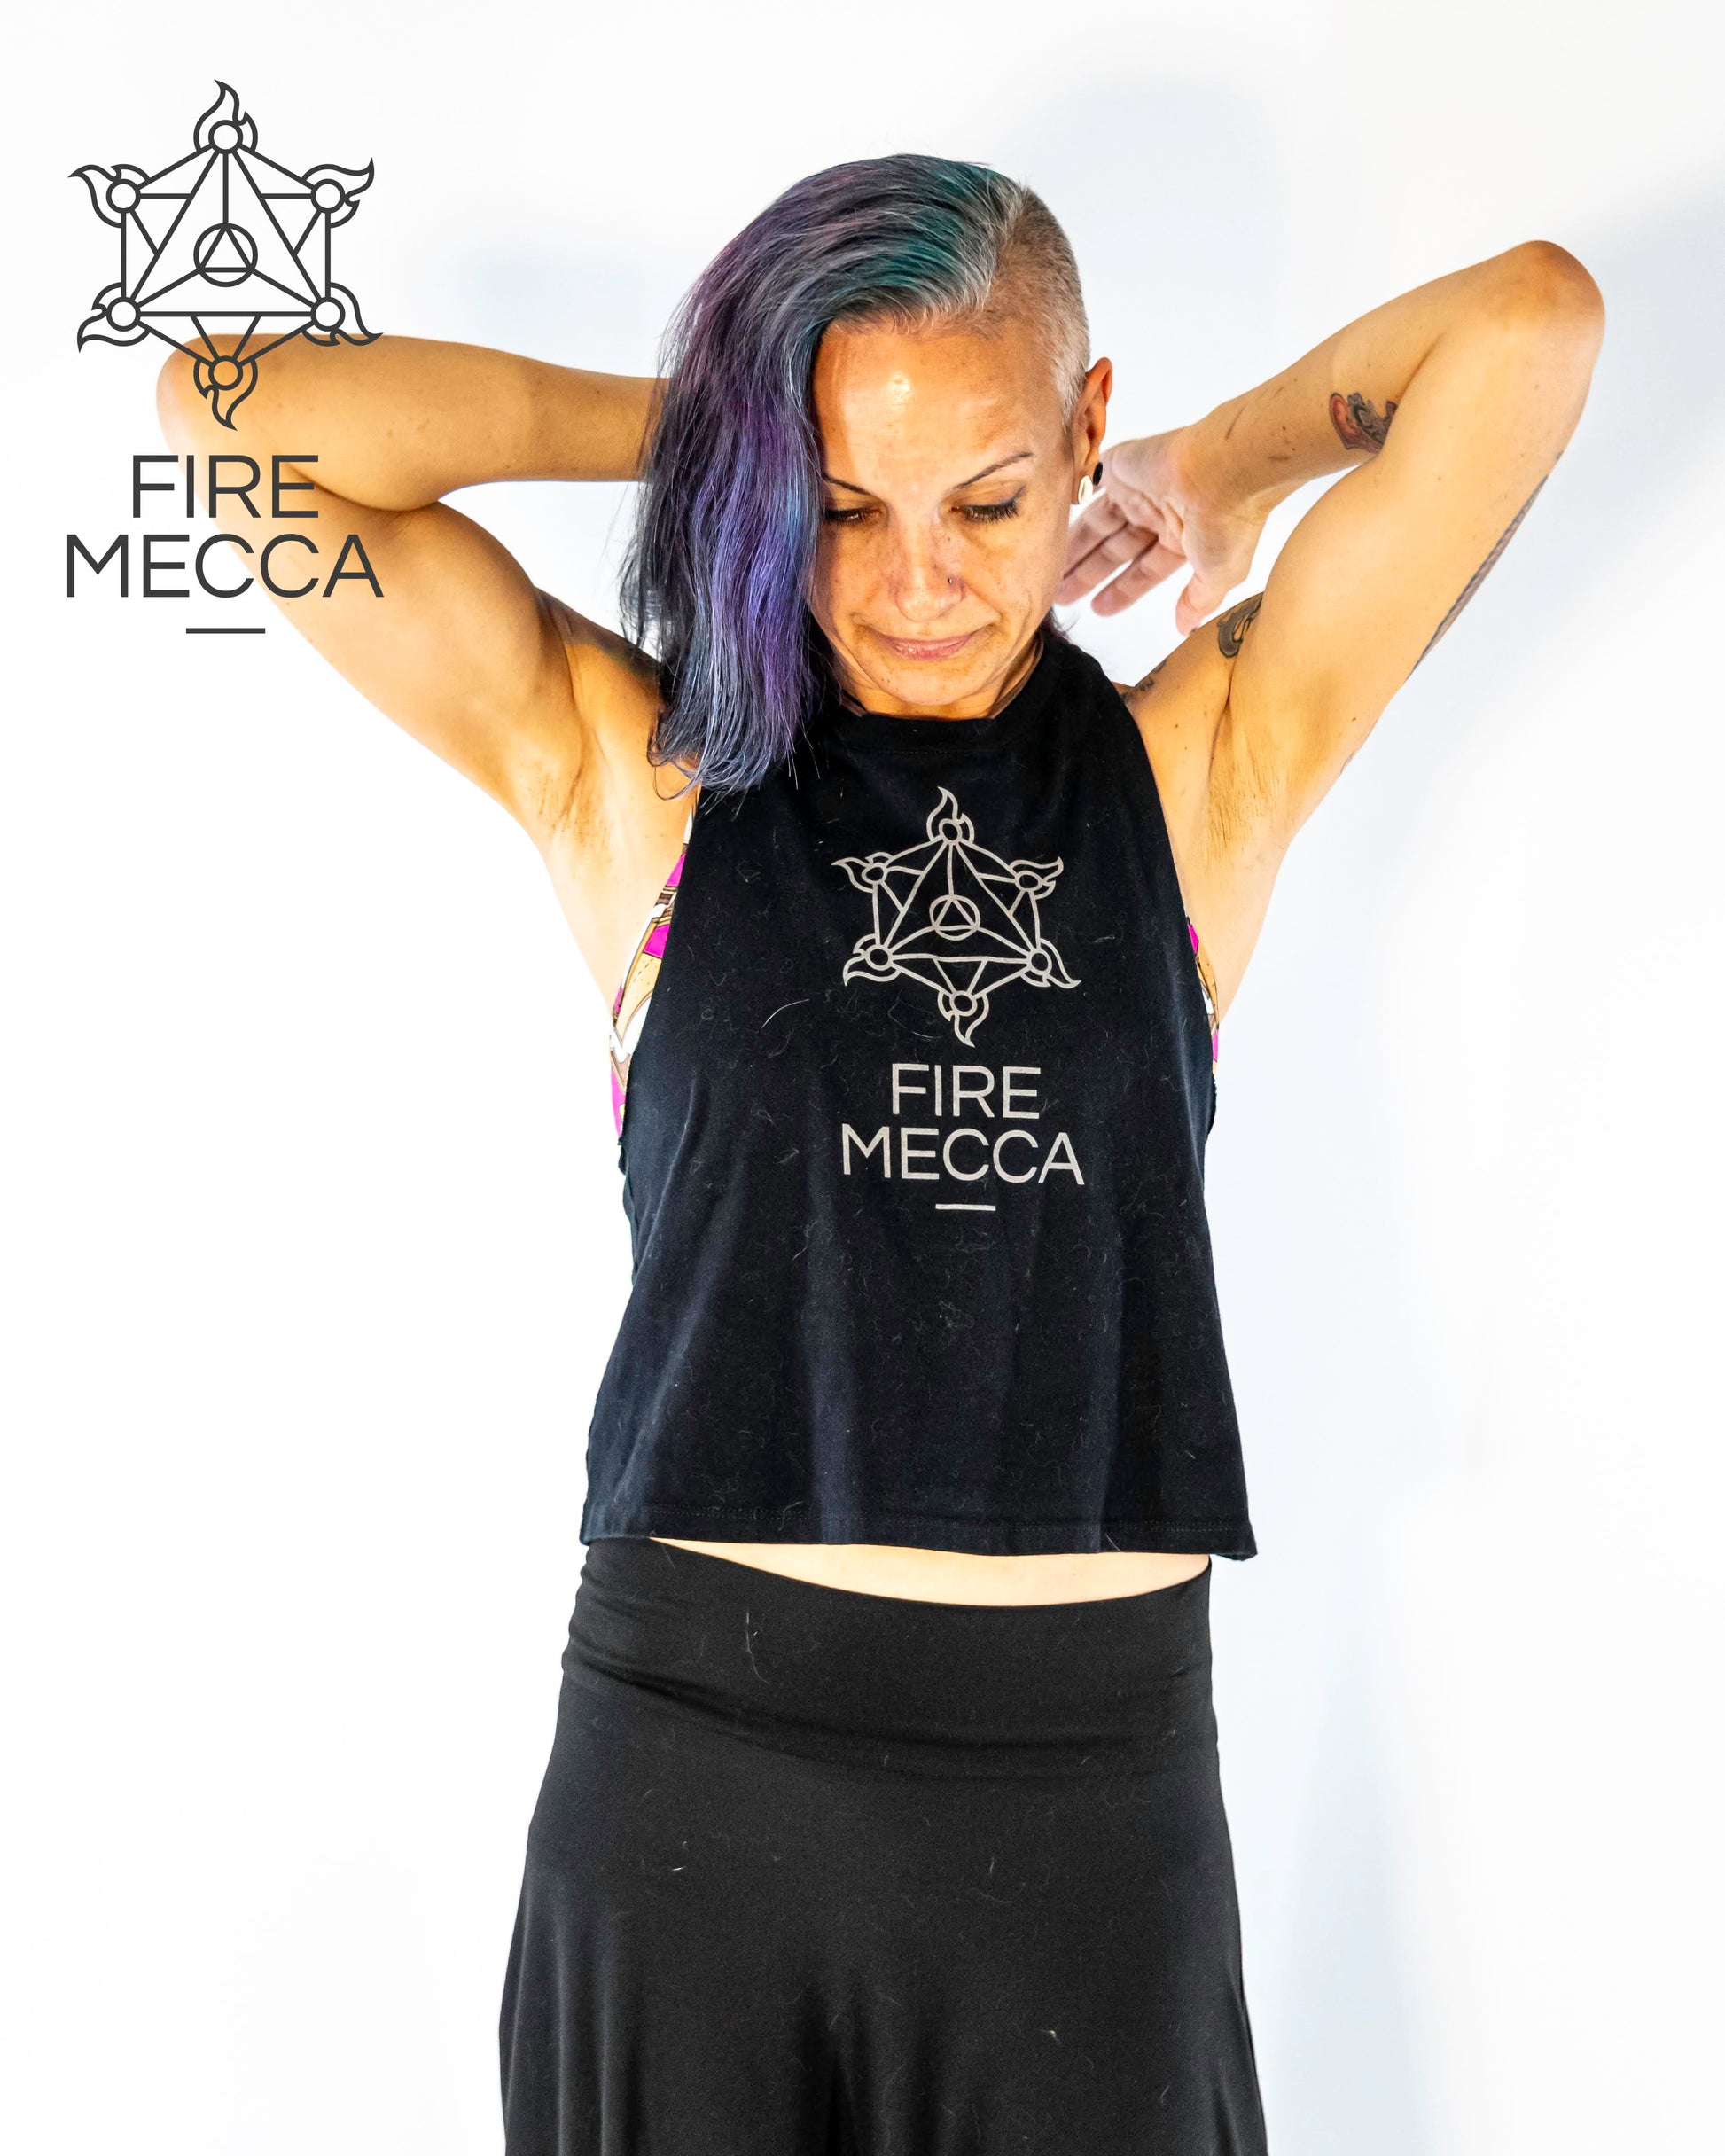 FIRE MECCA SLEEVELESS Crop Top – 100% Cotton – Fire Resistant Ink – Performer – Conclave – Flow, Spinning, Circus, Dance –Festivals & Performances - SLEEVELESS Crop T-Shirt 